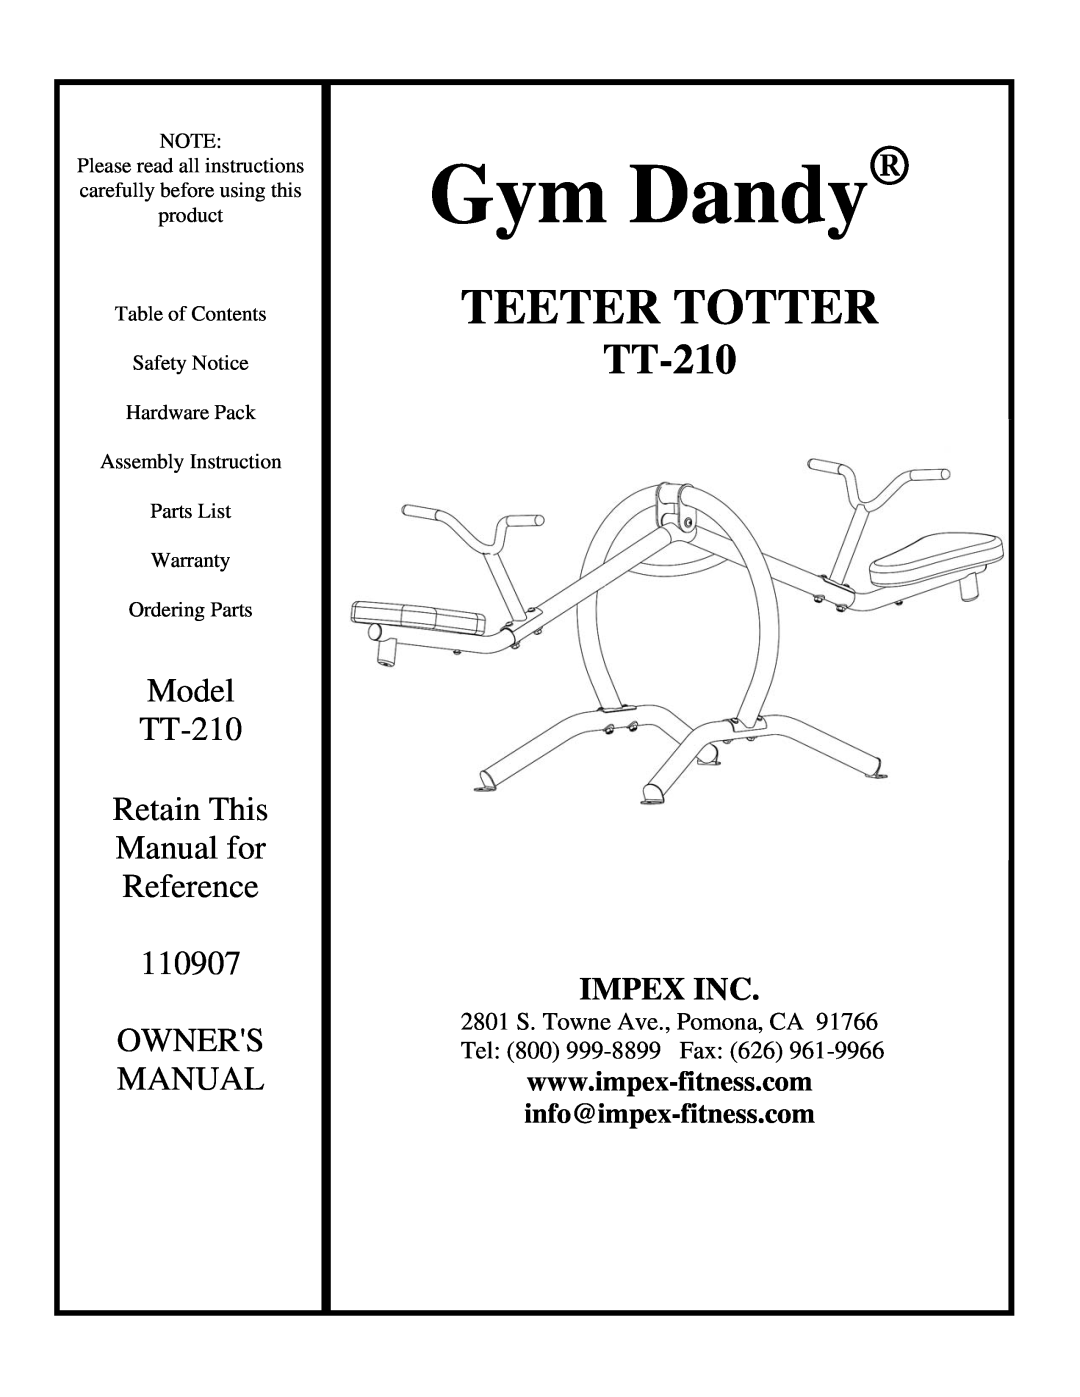 Impex manual Gym Dandy, Teeter Totter, Model TT-210 Retain This Manual for Reference 110907 OWNERS MANUAL, Impex Inc 